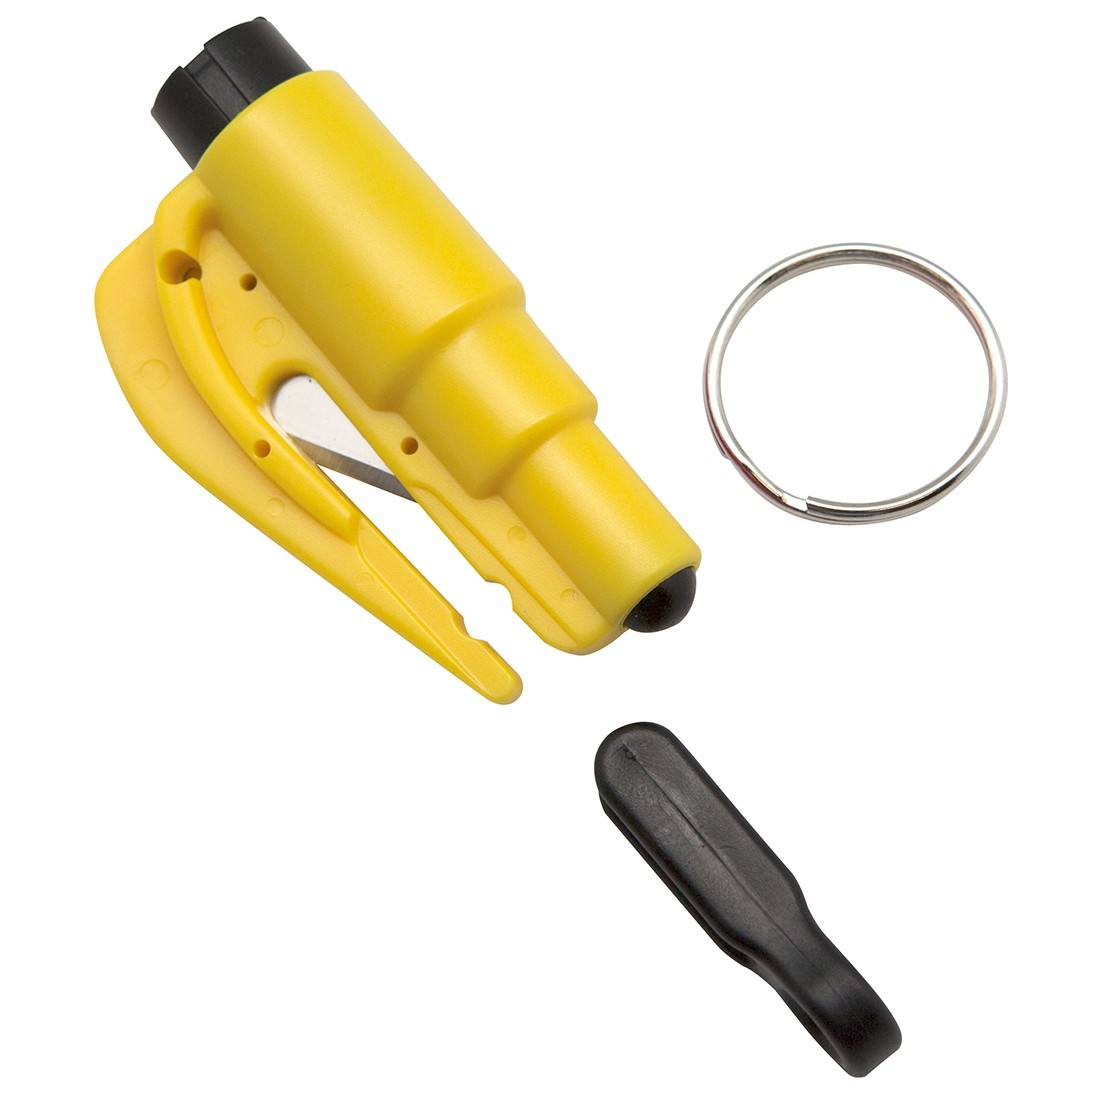 https://evaculife.com.au/wp-content/uploads/2018/04/yellow_keychain_glass_breaker_compact_for_home_and_car_belt_cutter_1.jpg